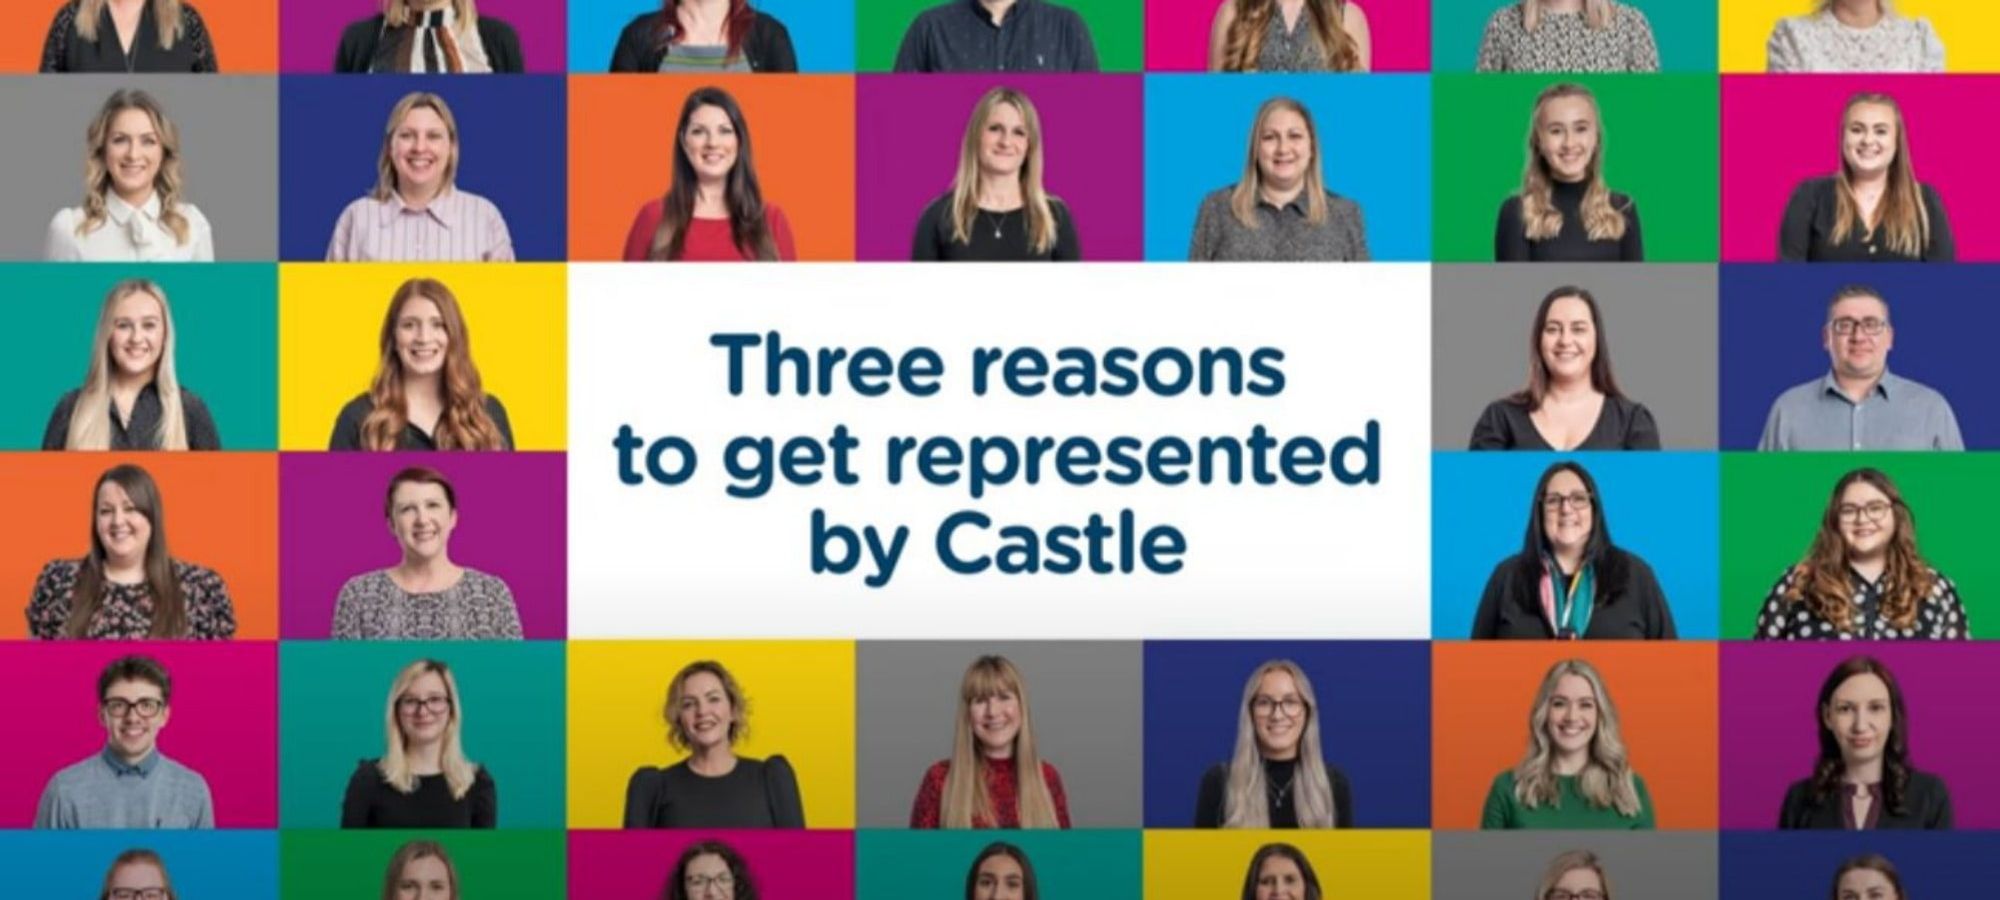 Life at Castle Employment Group